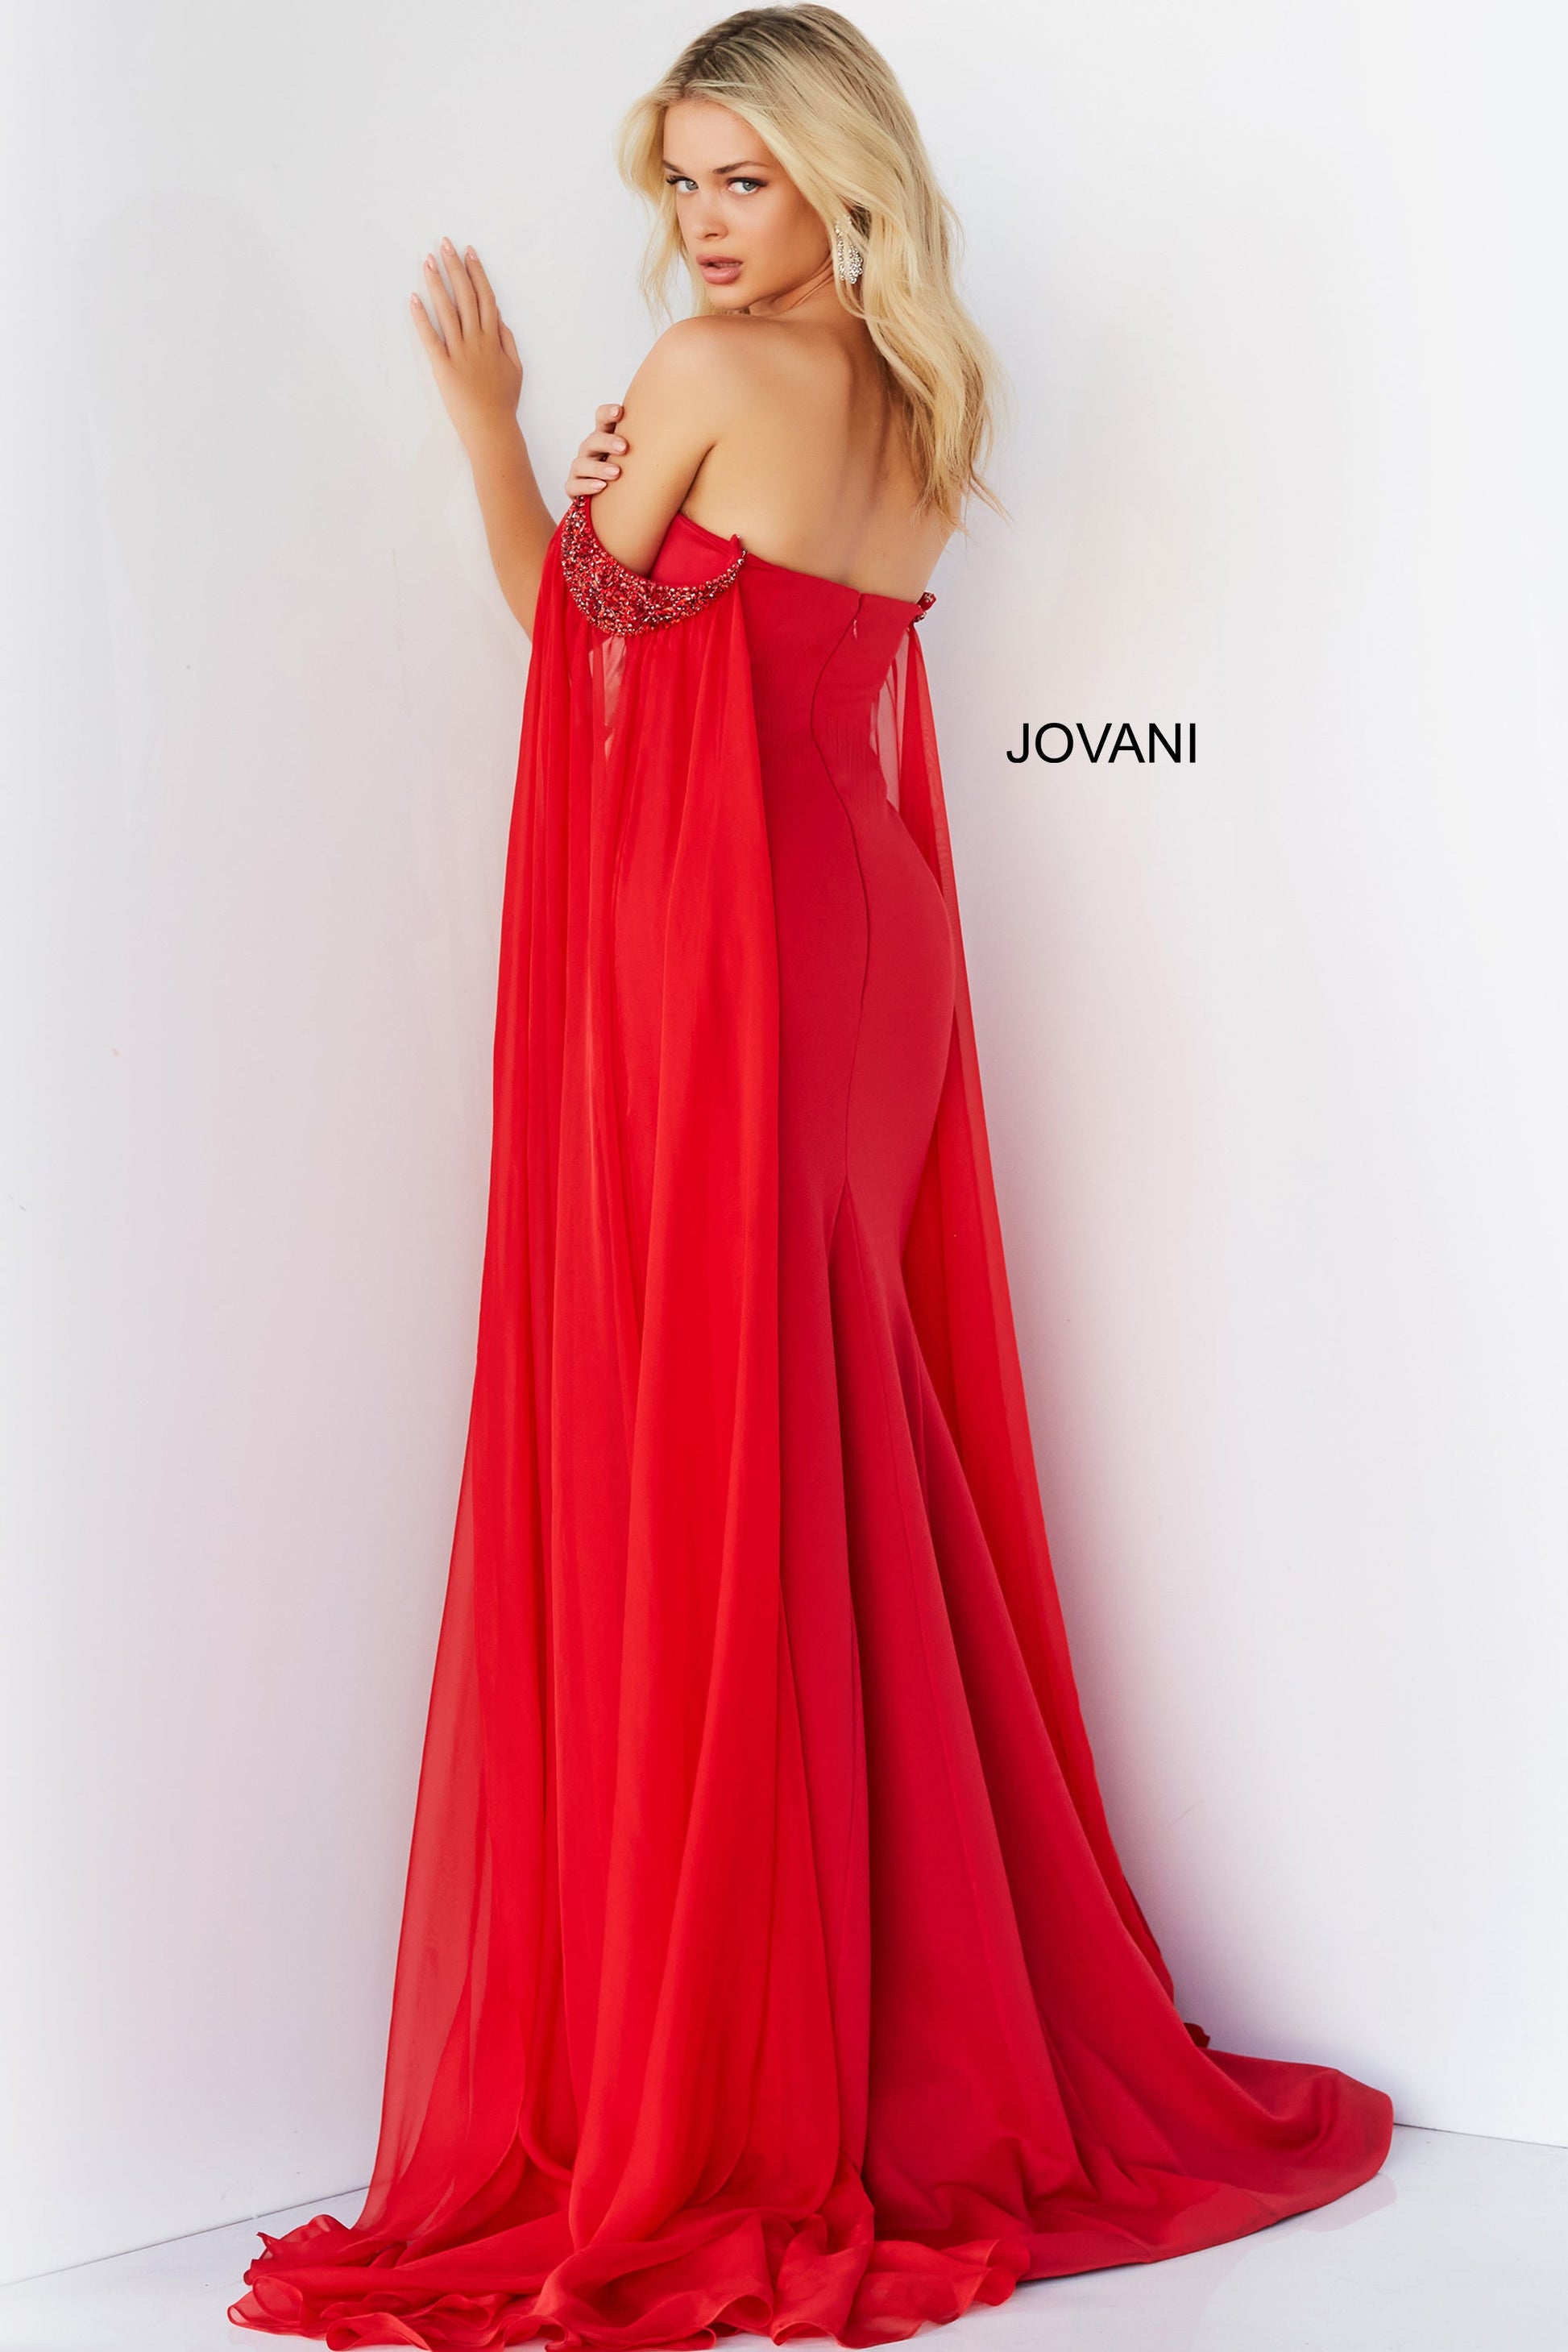 Jovani 07652 Prom Dress Cape Sleeves Pageant Gown.  This is a strapless prom dress with flattering fitted silhouette with an off-the-shoulder sweetheart neckline. It has  beaded chiffon around the arms with long sheer sweeping chiffon Cape Sleeves.  Excellent choice for Pageants.